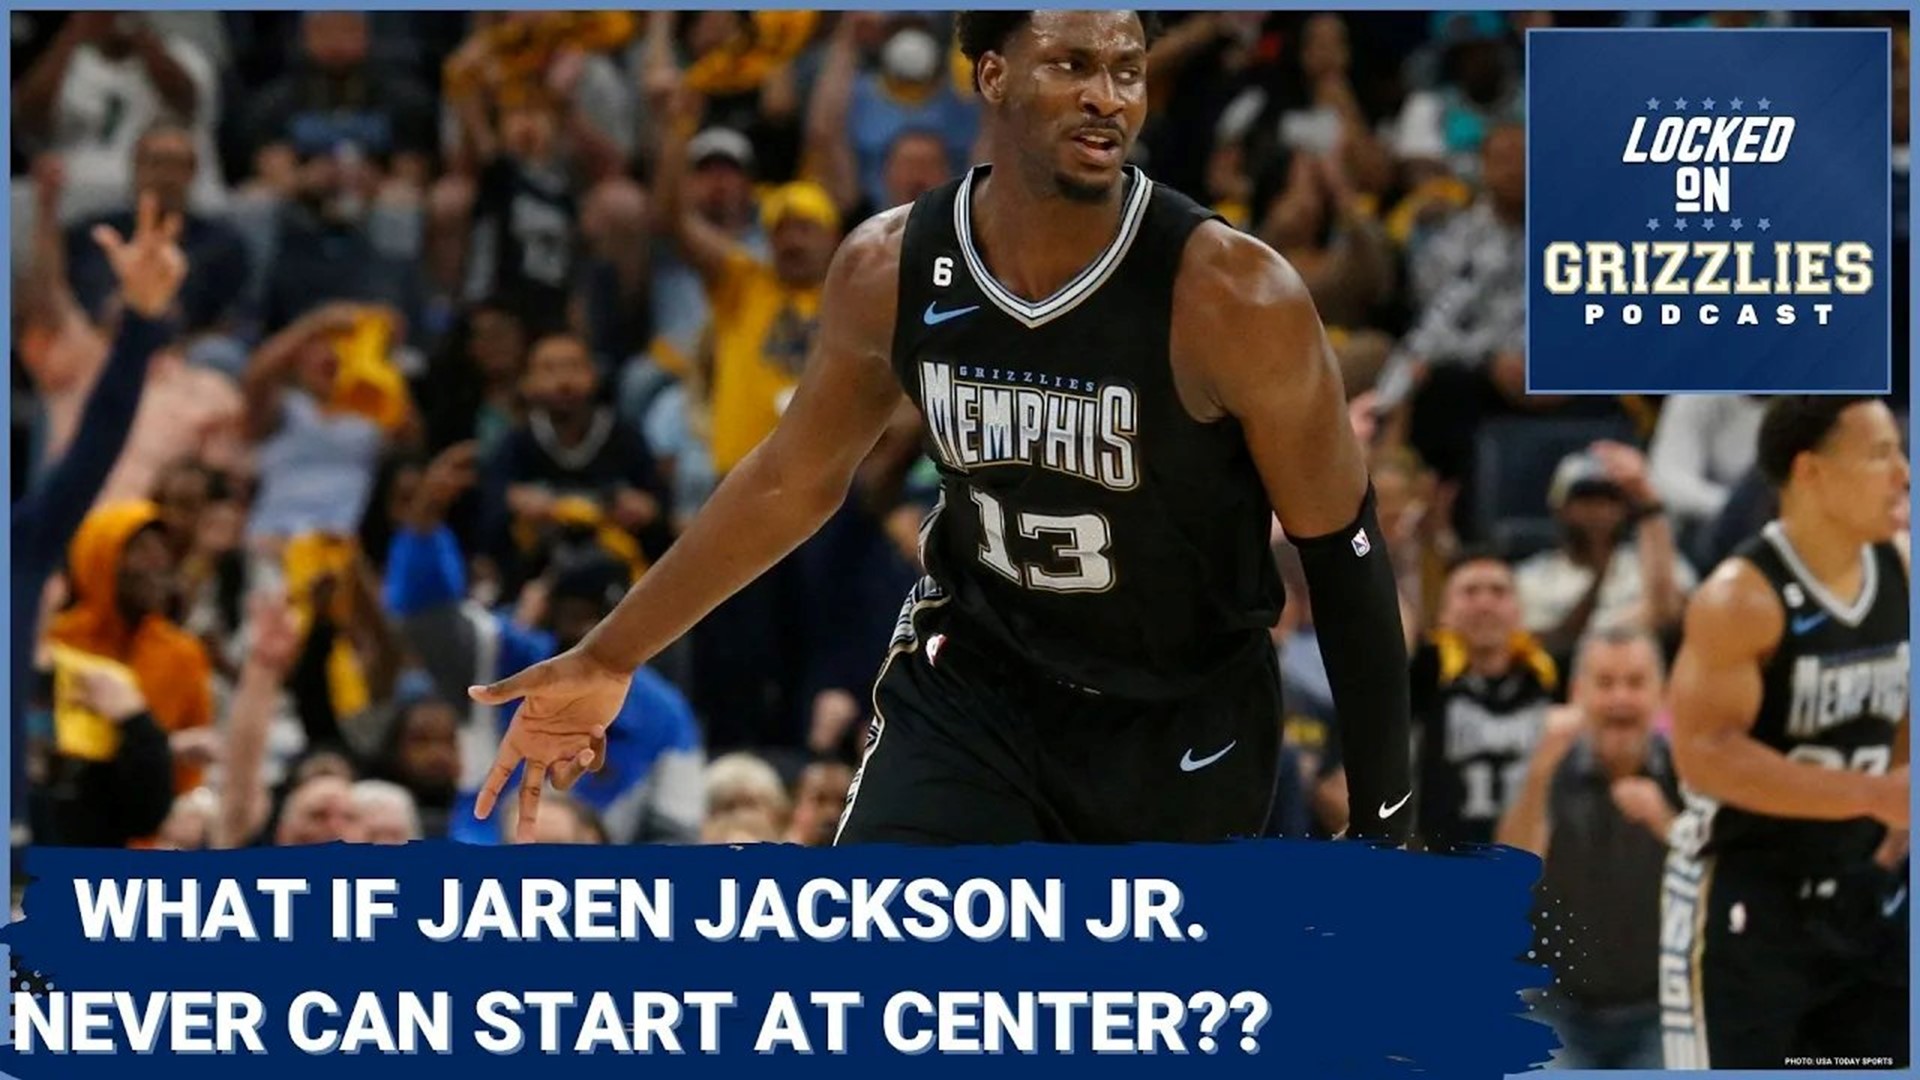 Will Jaren Jackson Jr. ever be the starting center for the Memphis Grizzlies?